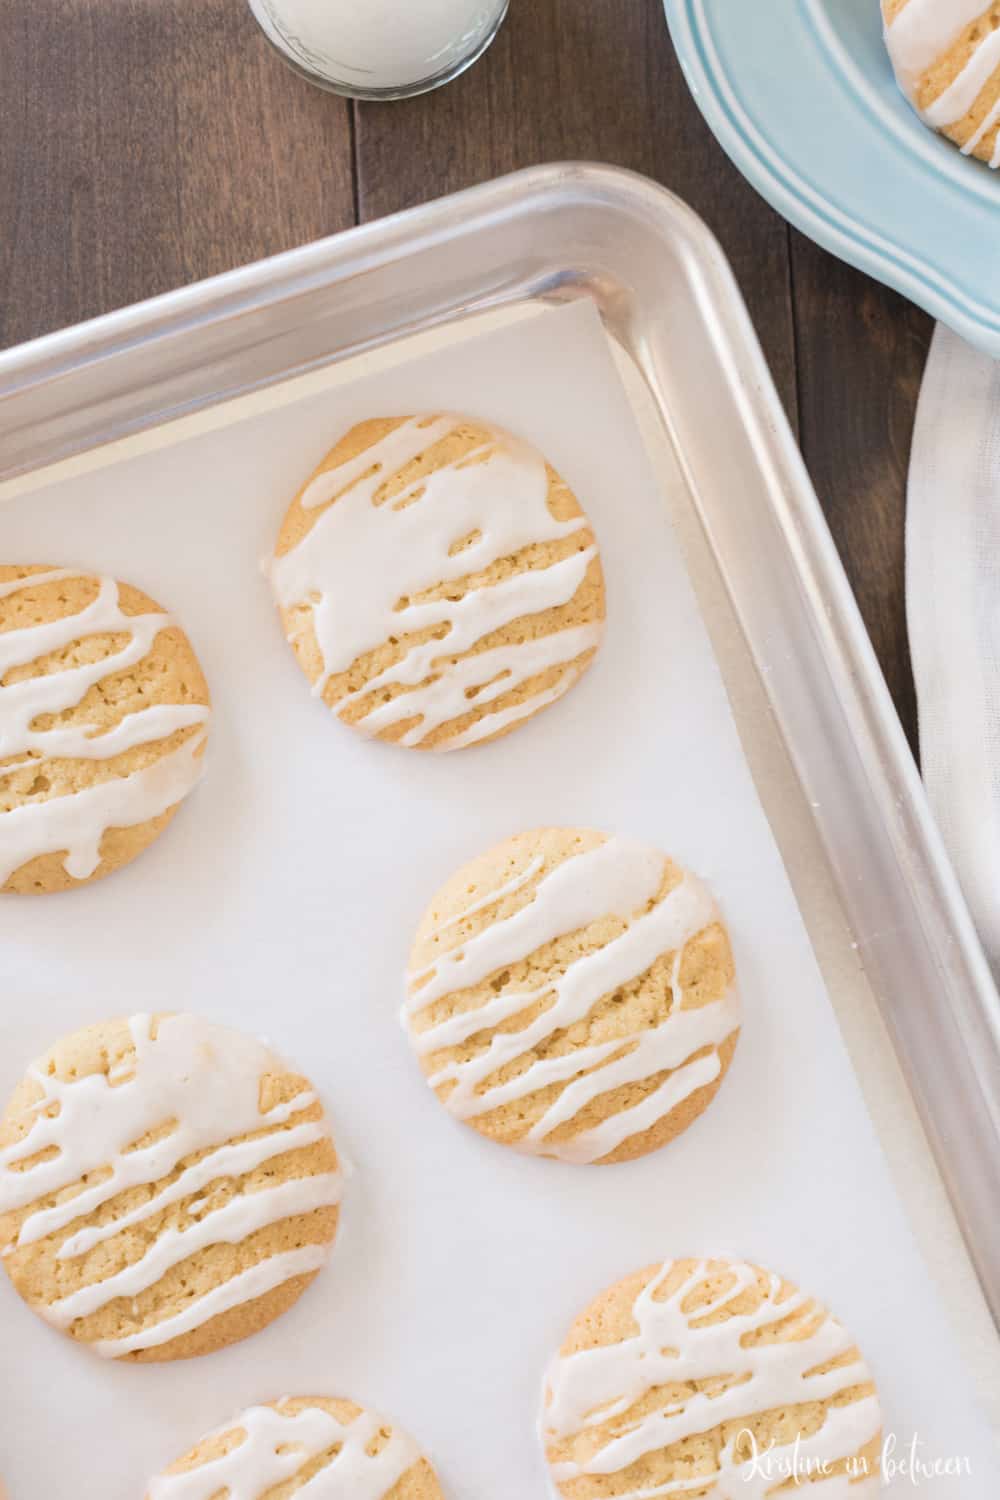 You'll love these small-batch thin and chewy maple sugar cookies!